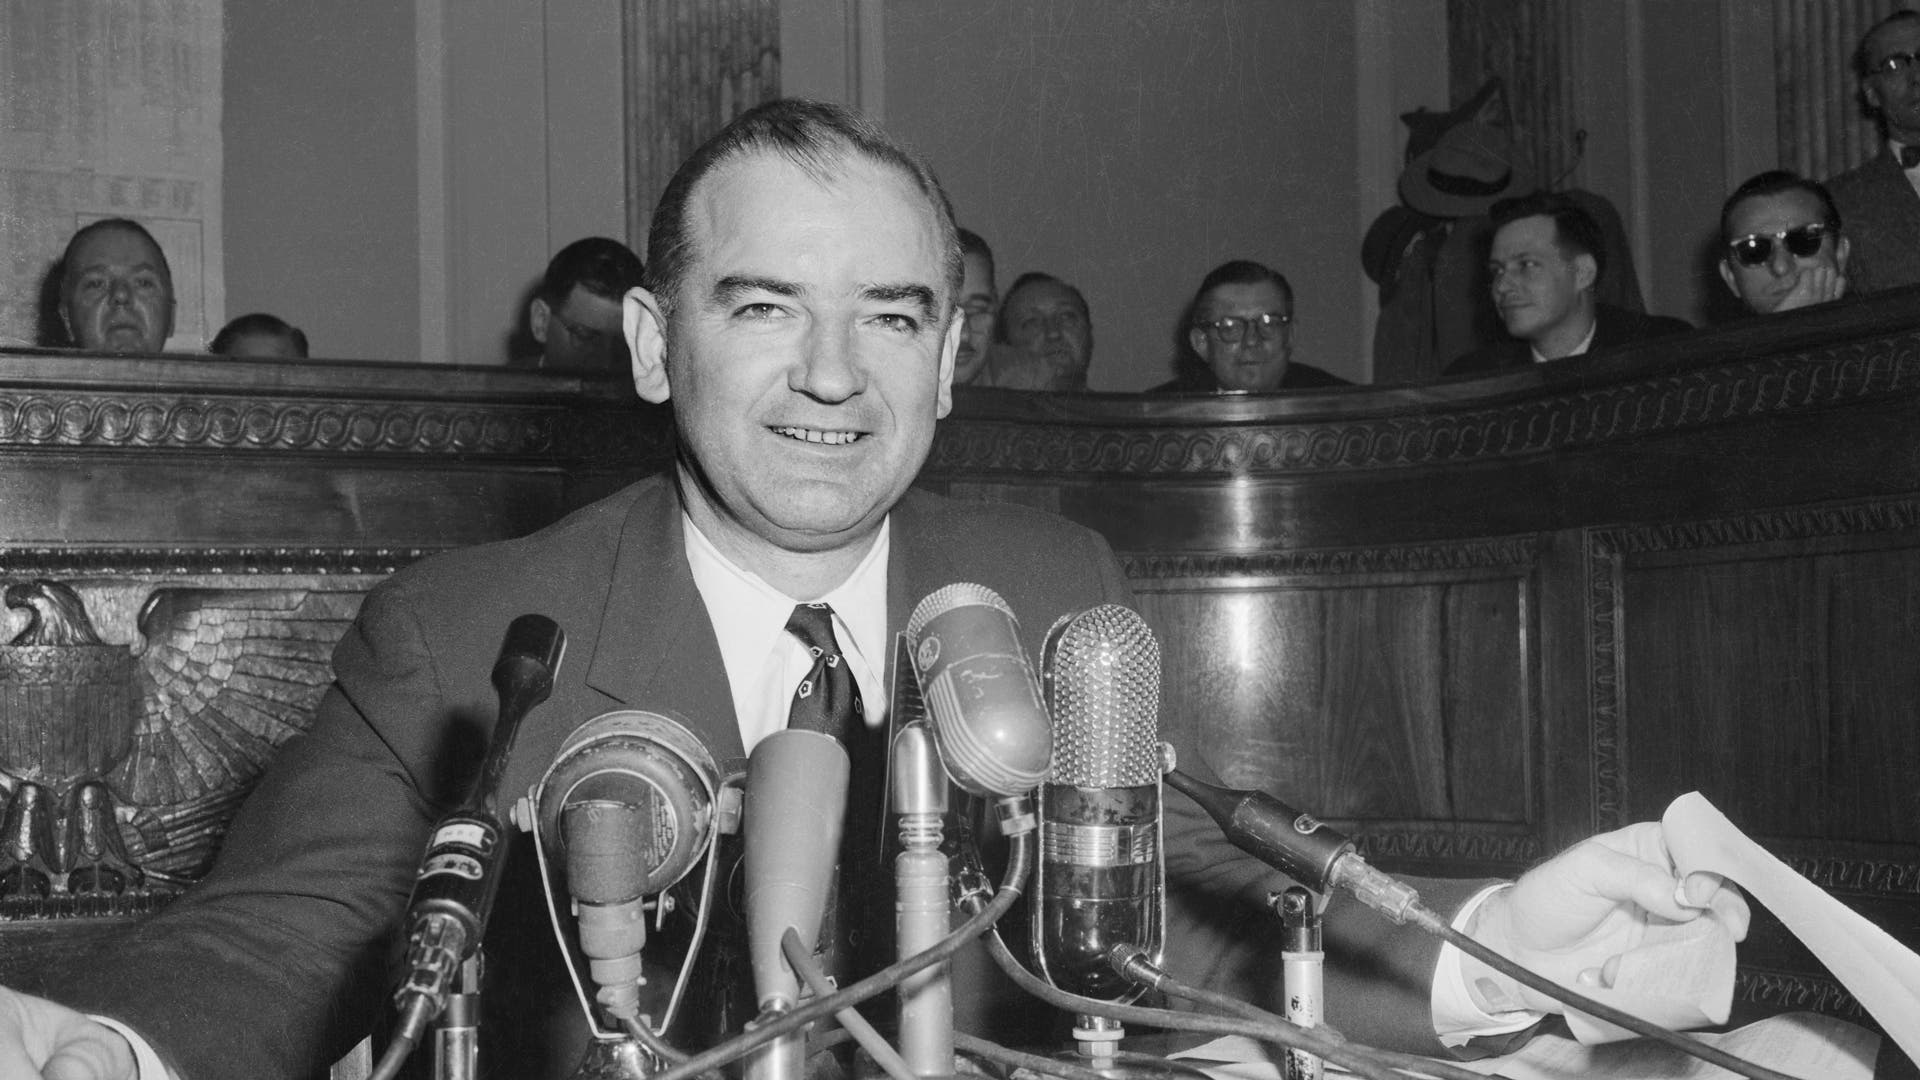 Senator McCarthy Attending US Army Hearings (Original Caption) Senator Joseph R. McCarthy chairman of the Senate Investigations Subcommittee, is shown as he took center stage again to comment on the latest developments in his dispute with the White House and Army Secretary Robert T. Stevens.